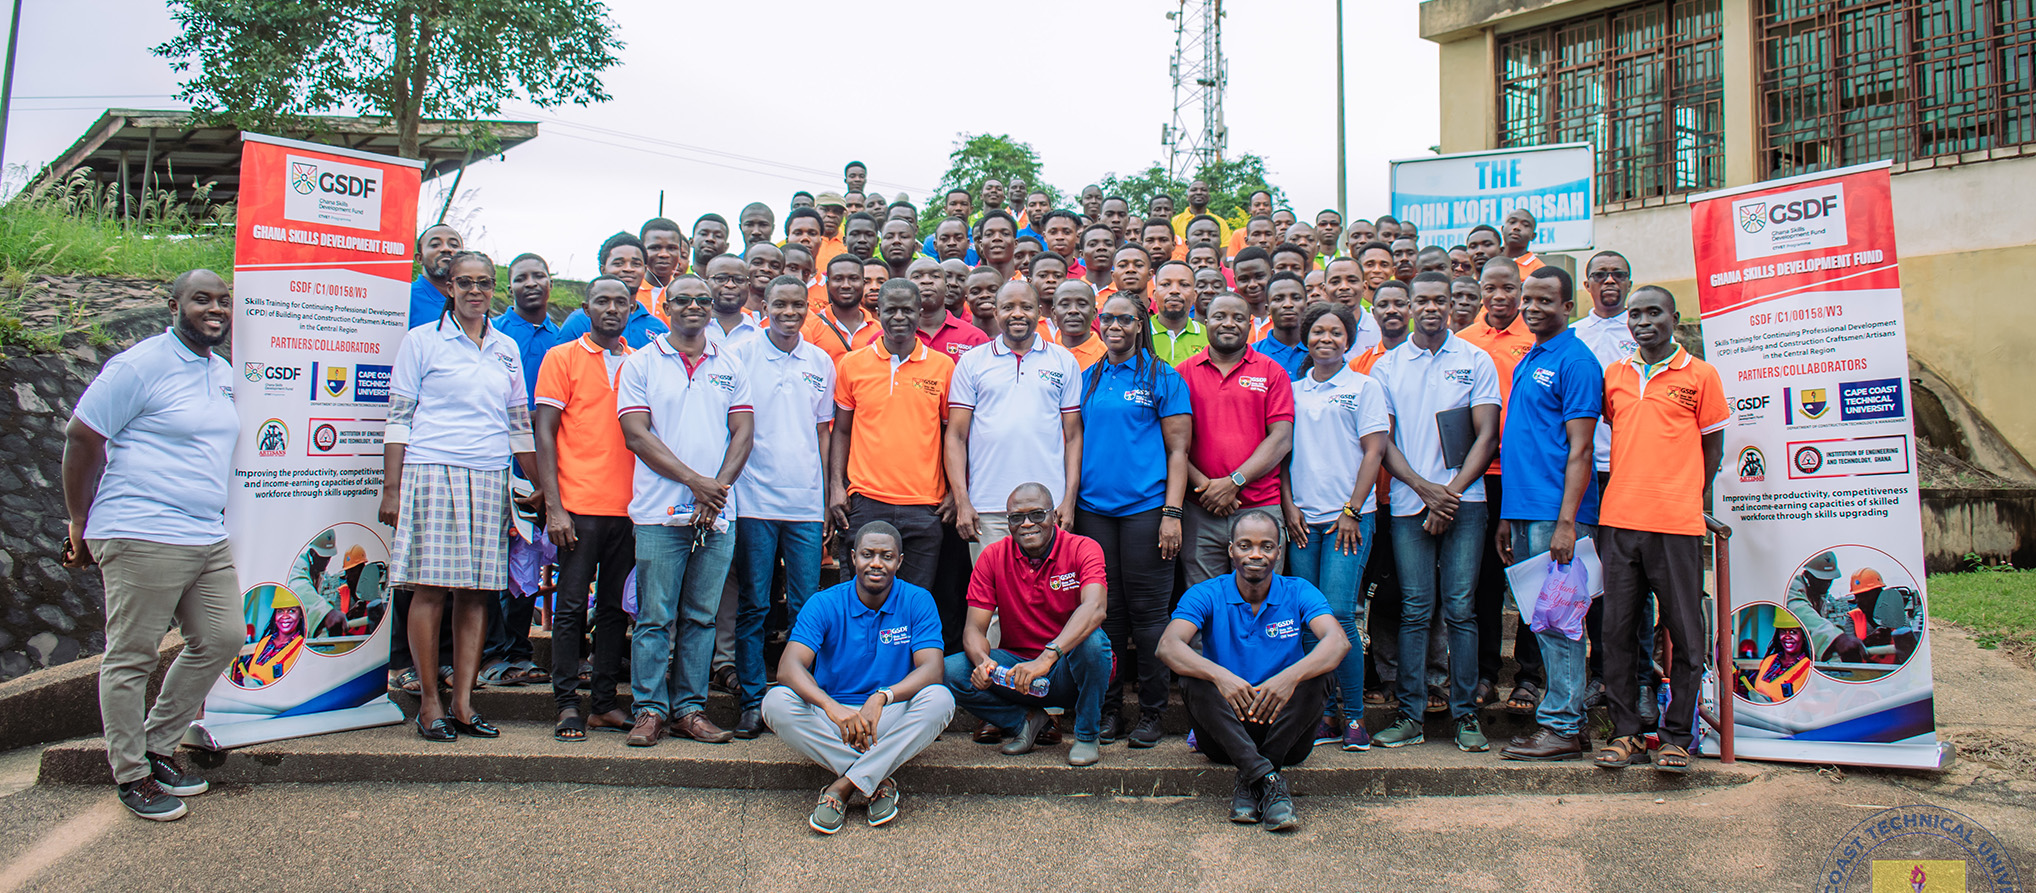 Ghana Skills Development Fund (GSDF) in Collaboration with Cape Coast Technical University (CCTU) and Artisans Association of Ghana Organises Project Orientation Workshop